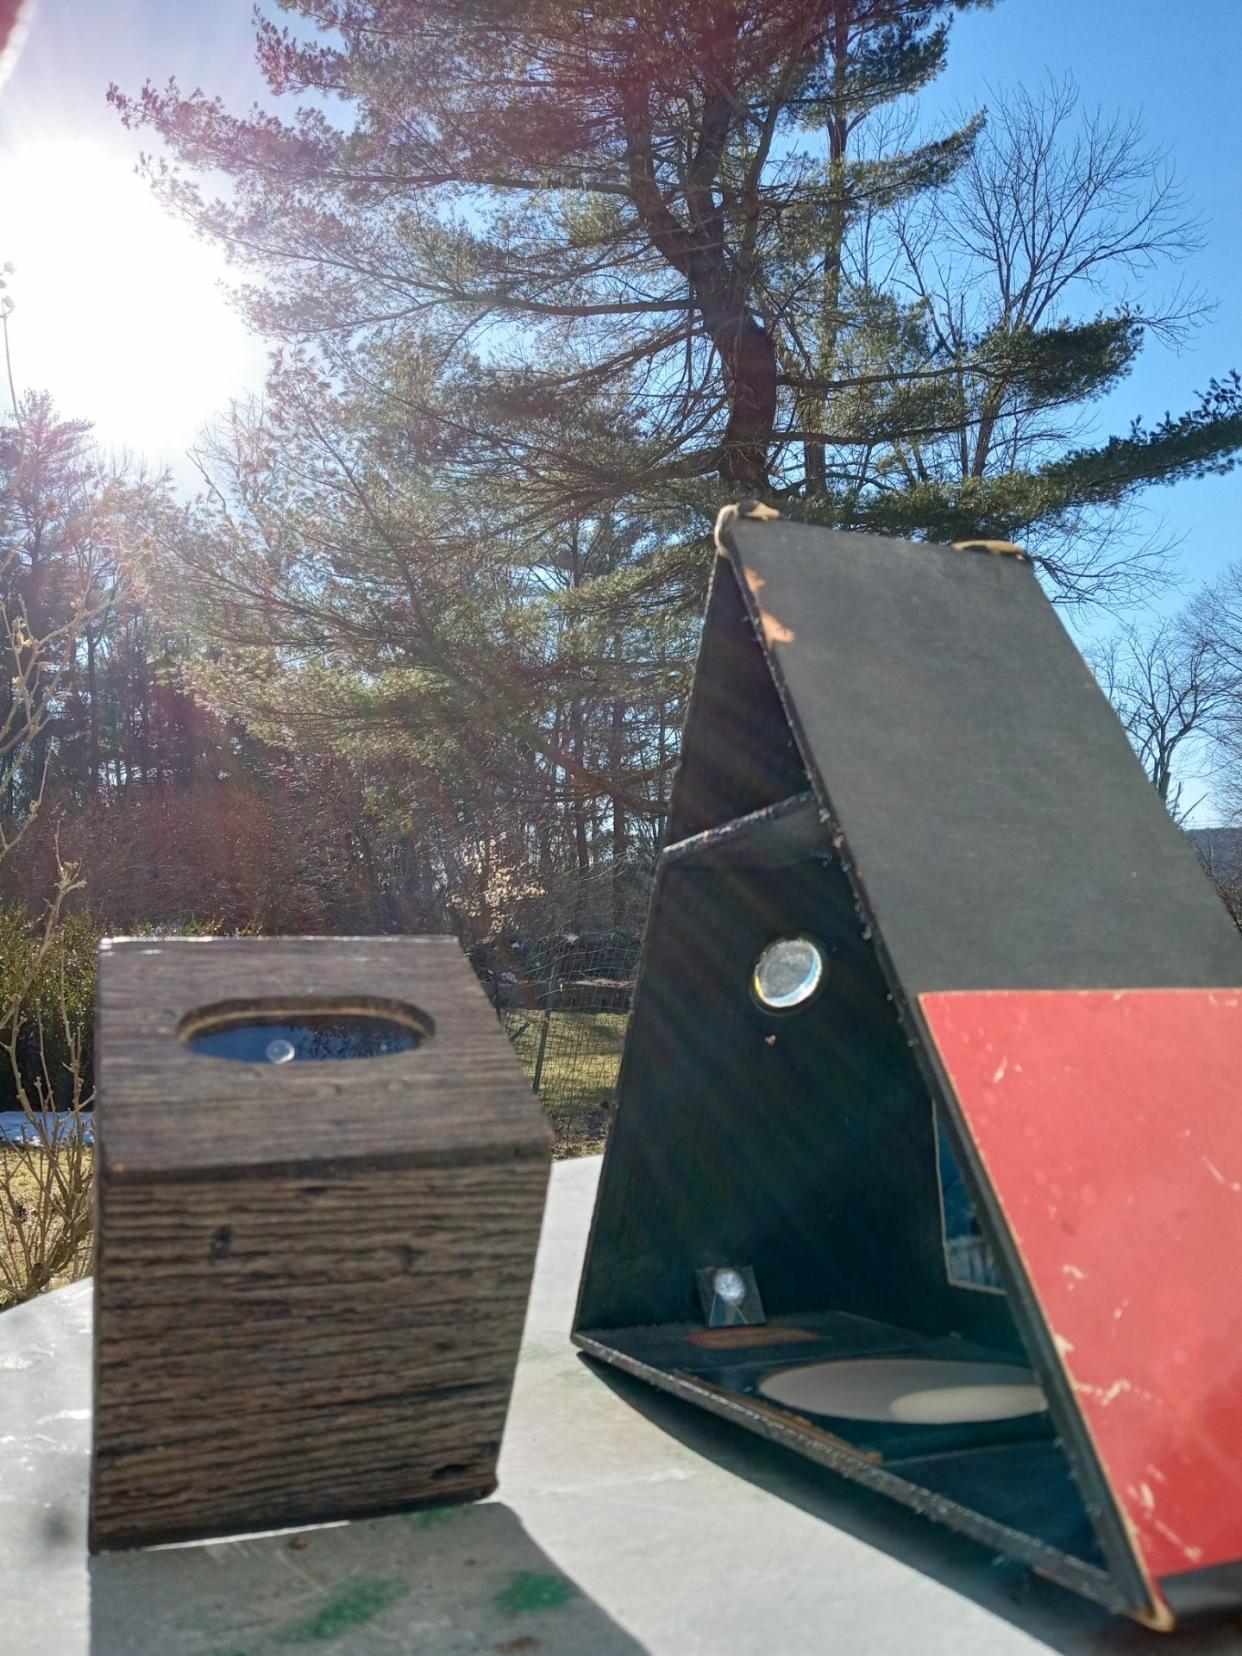 At left is the first cubical version of the original Sunspotter solar telescope, first built in 1978 by the late inventor Daniel R. Janosik Sr. who built them from his home in Pike County. In a few years he was mass producing his triangular Sunspotter-II, selling them across the country. The device shows an image of the sun about two and a half inches wide completely safe to look upon, revealing many of the sunspots that come and go. It is also very useful for viewing a partial solar eclipse.